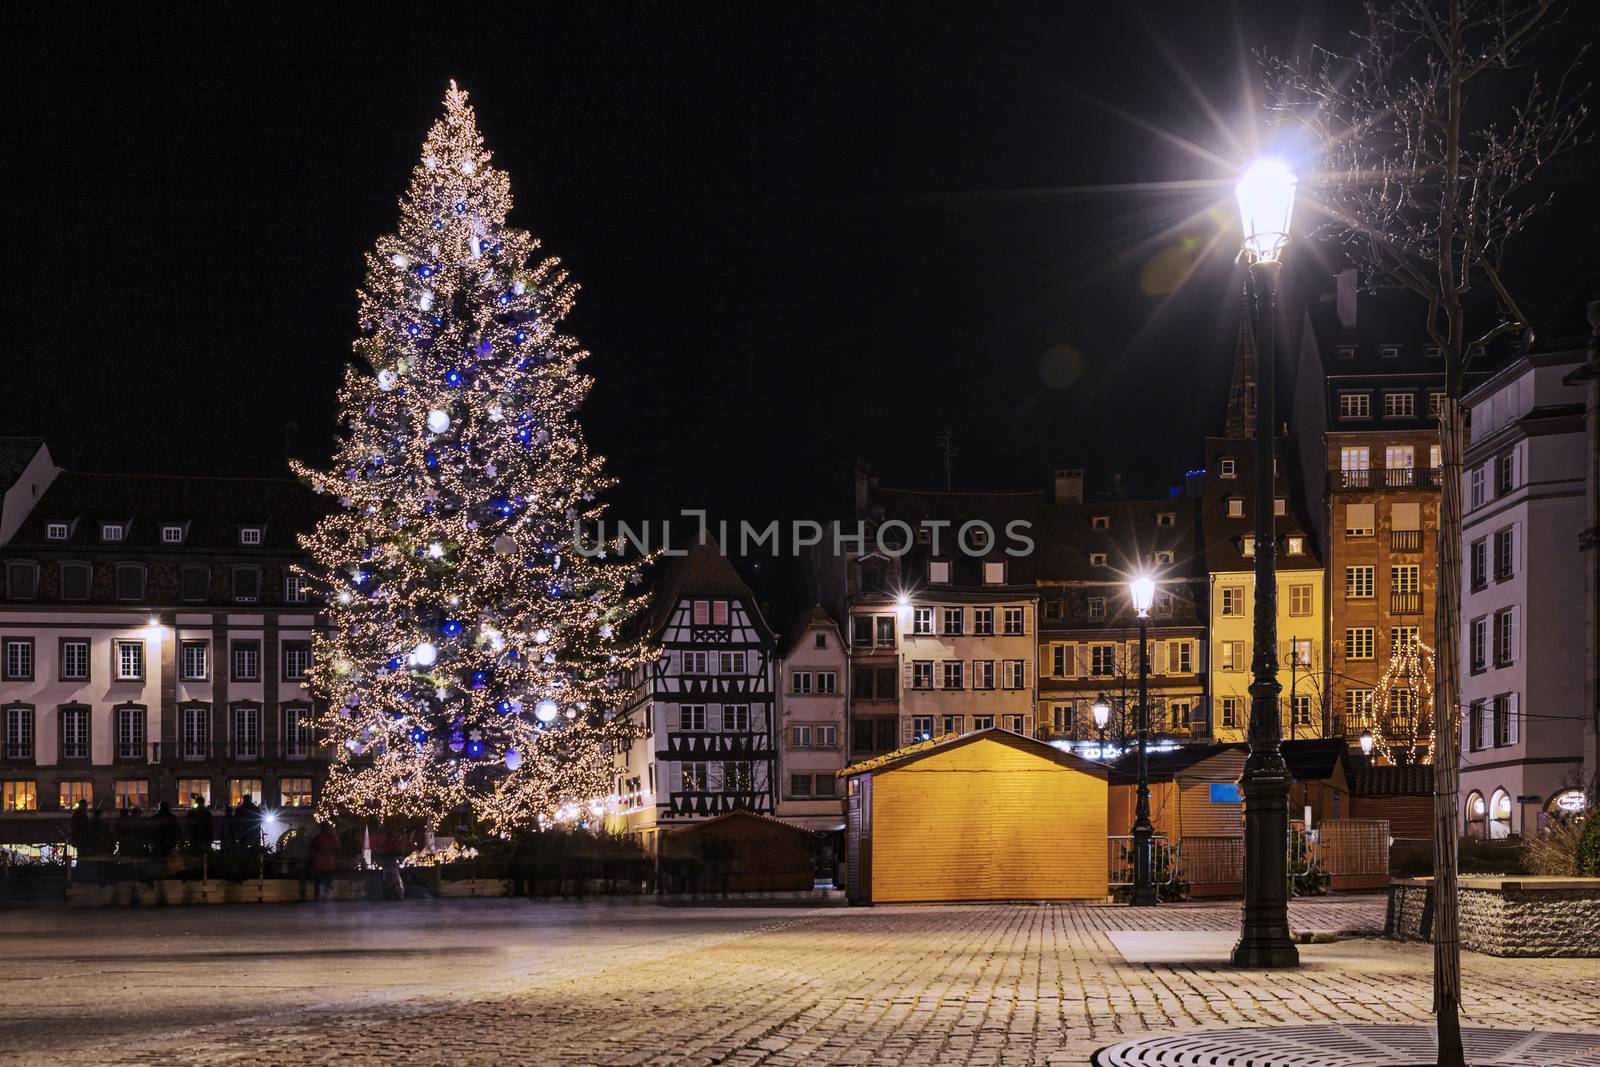 Gigantic Christmas tree in the biggest place of Strasbourg, Kleber place, illuminated during the Christmas season by ankorlight